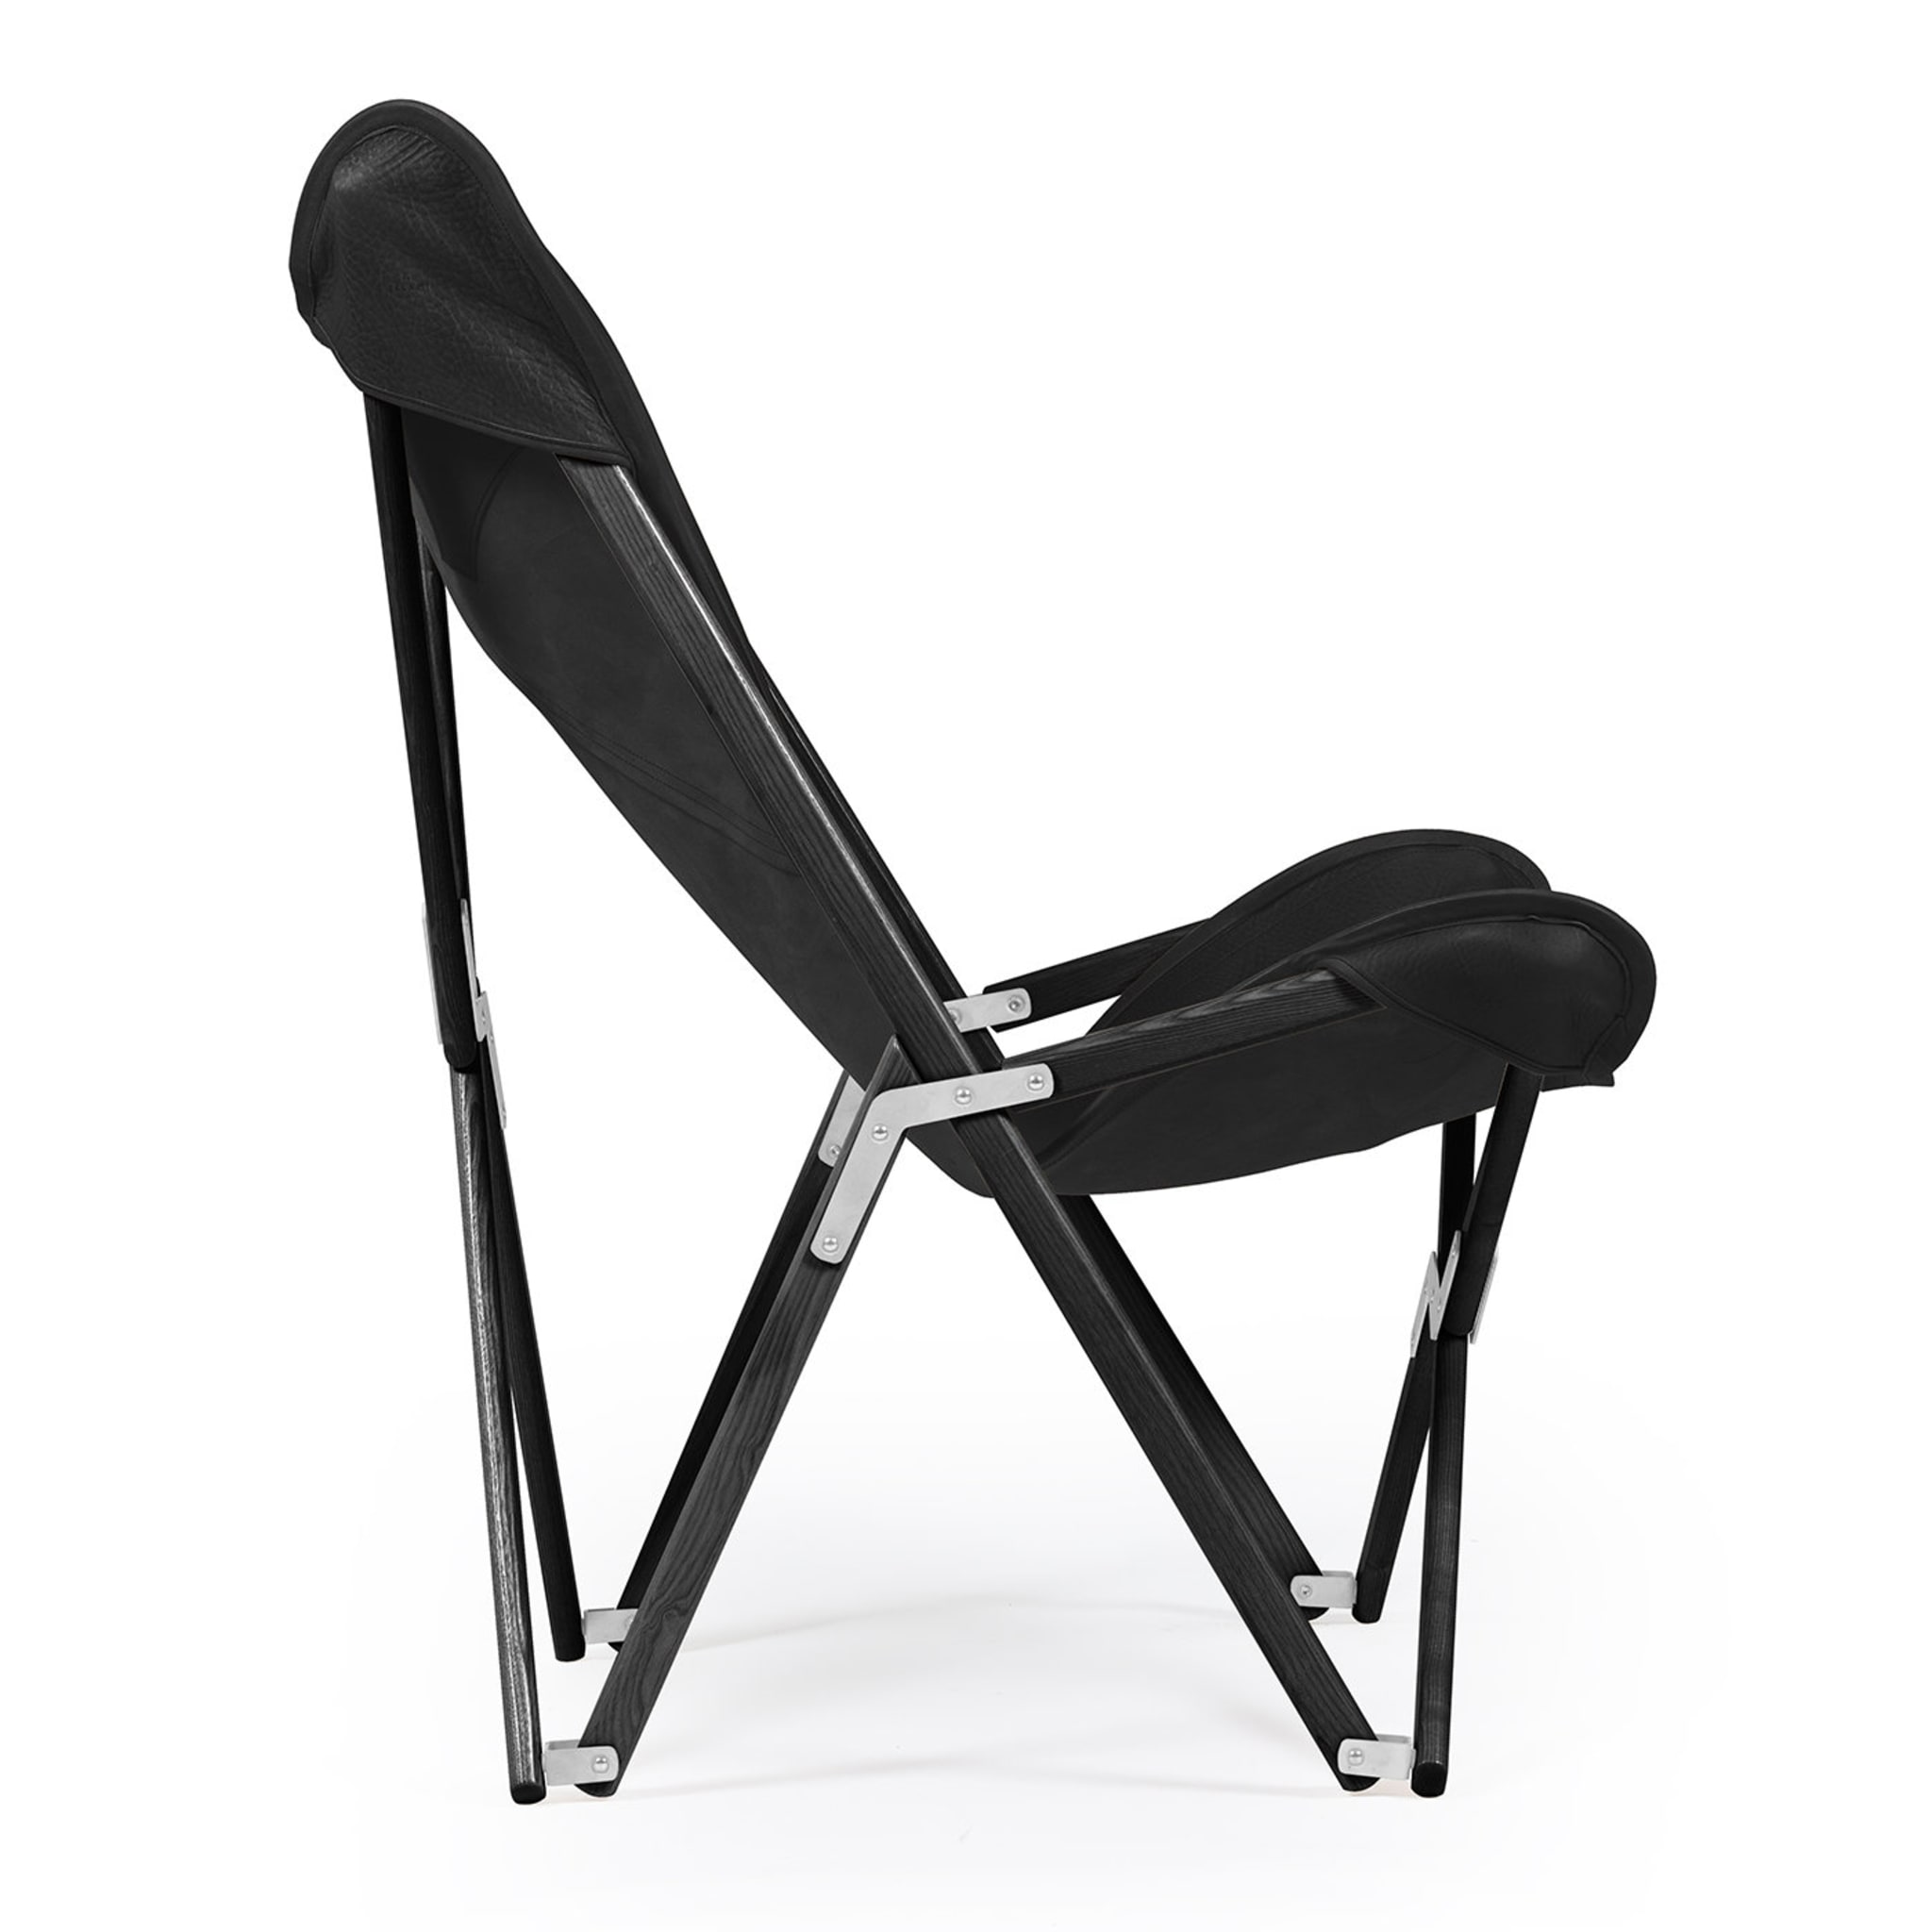 Tripolina Armchair in Black Leather - Alternative view 1